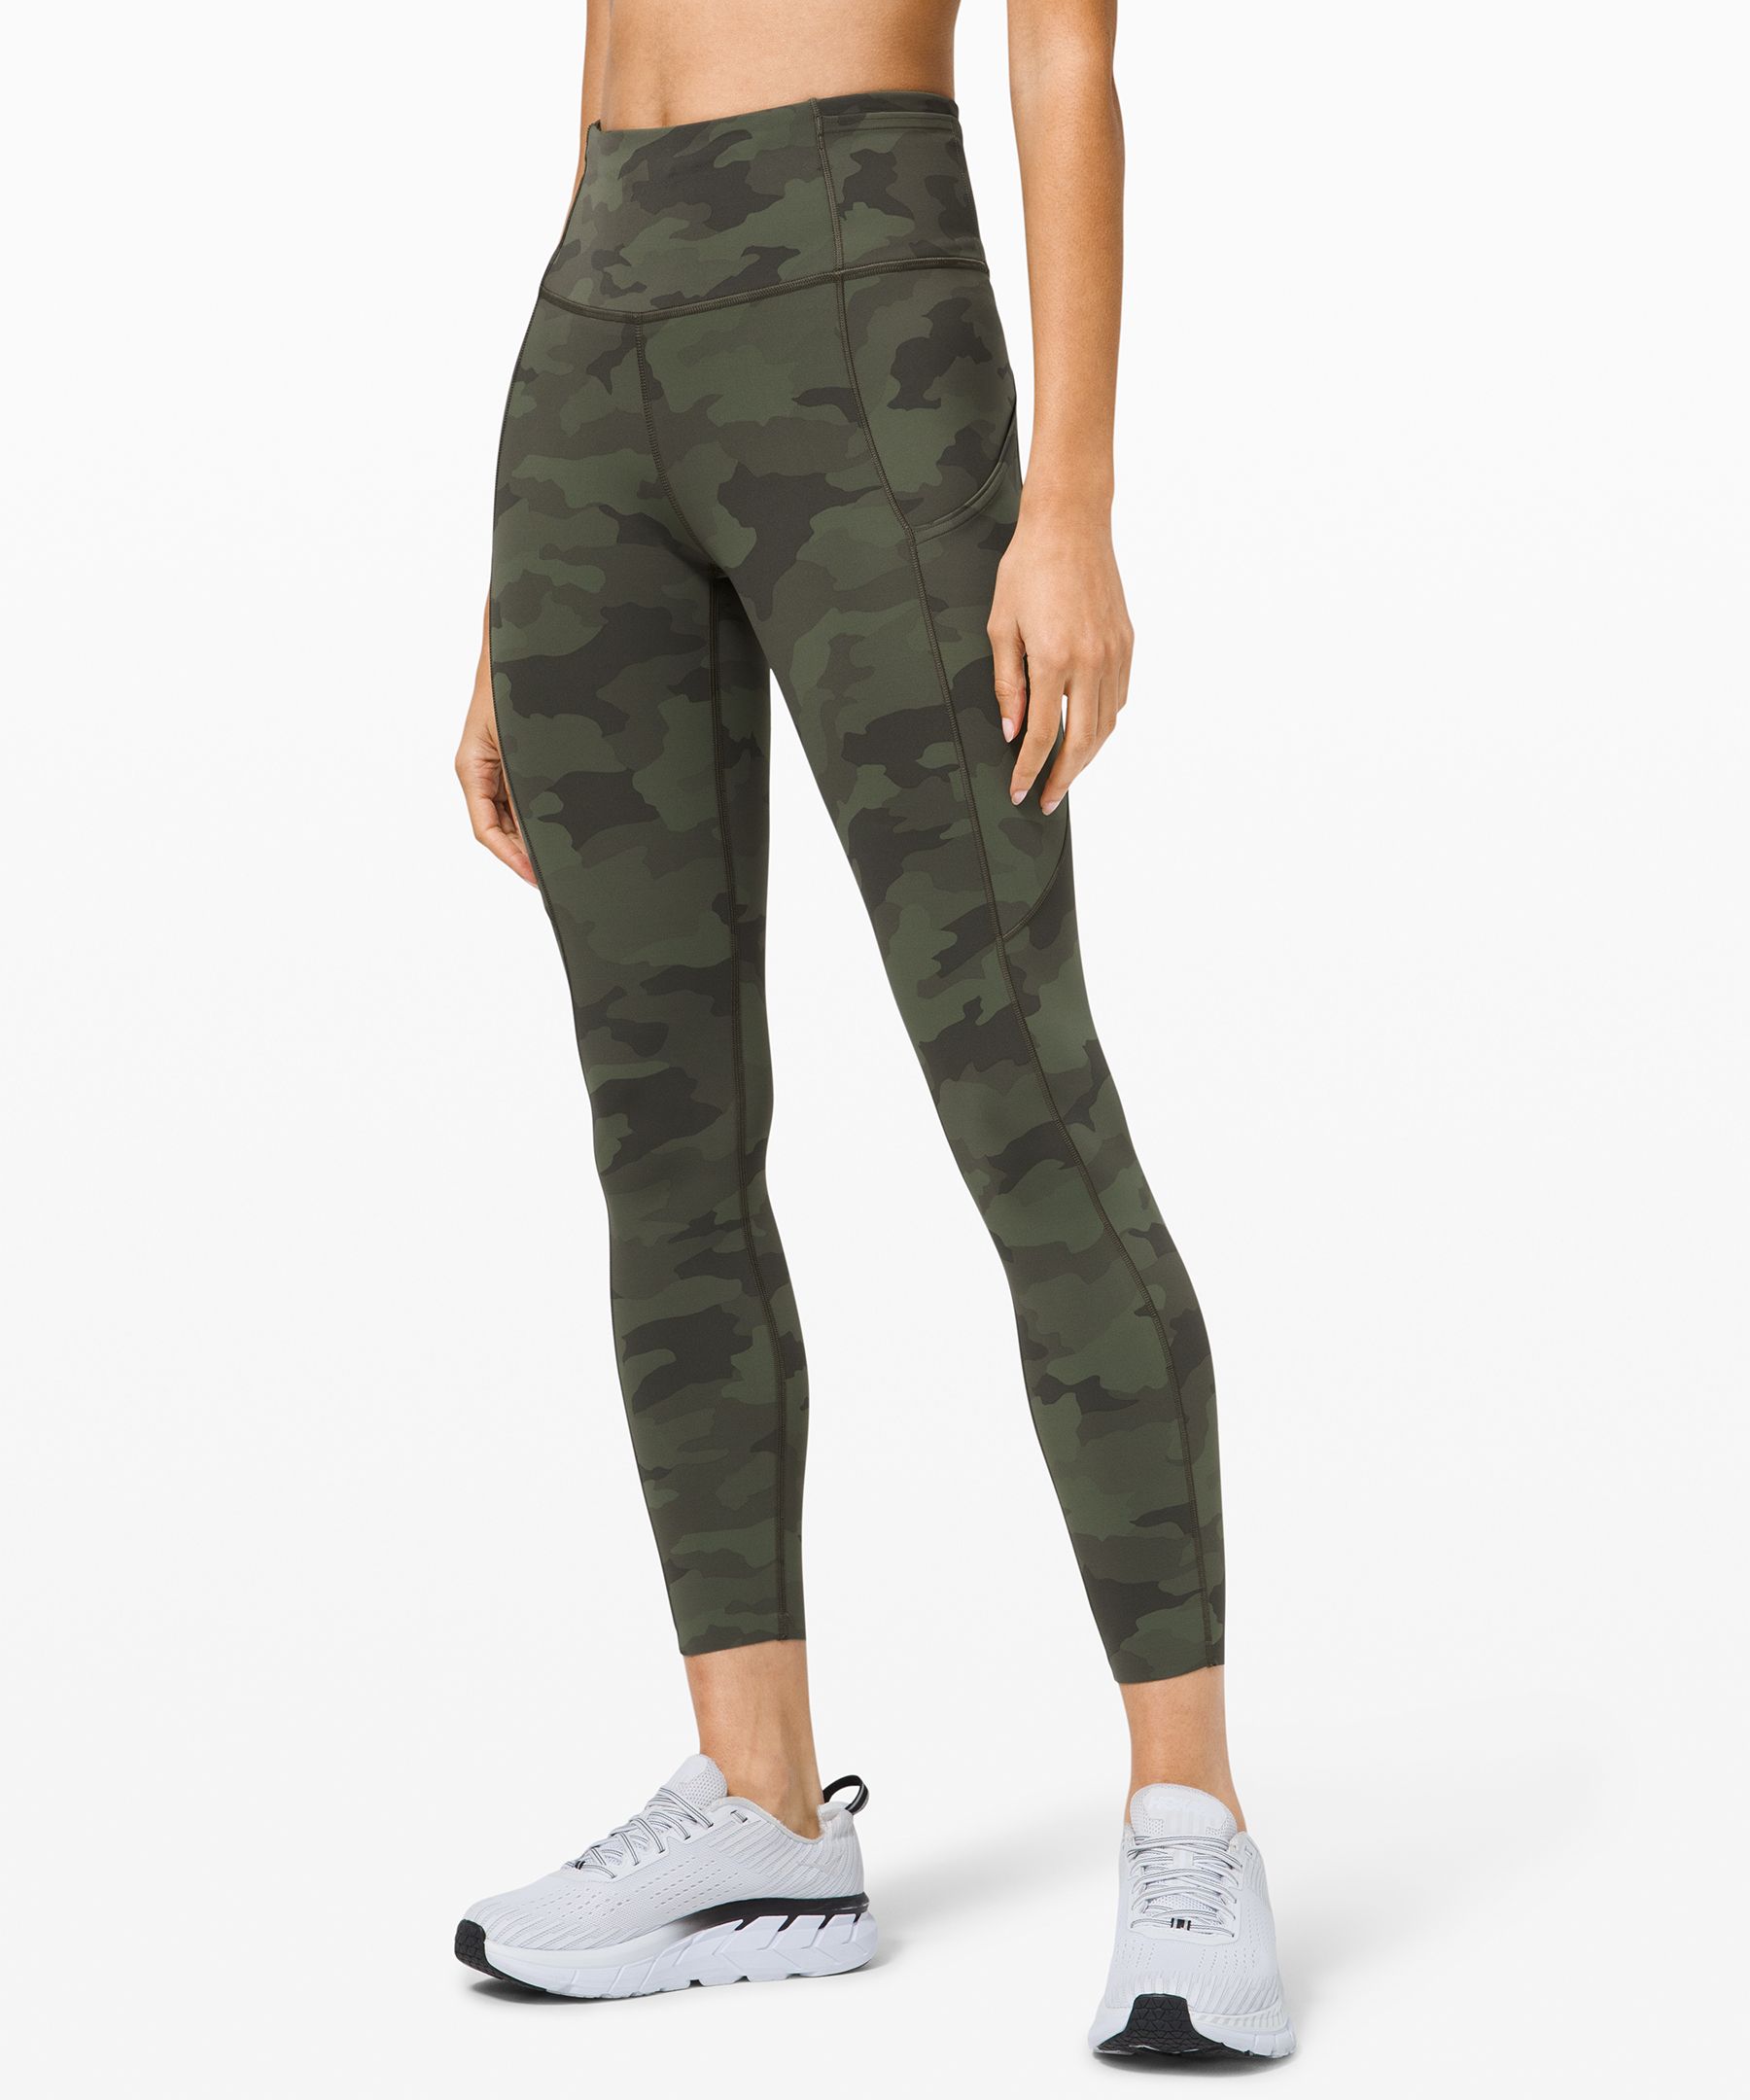 Lululemon • Fast and Free HR Tight 25” Heritage 365 Camo Crispin